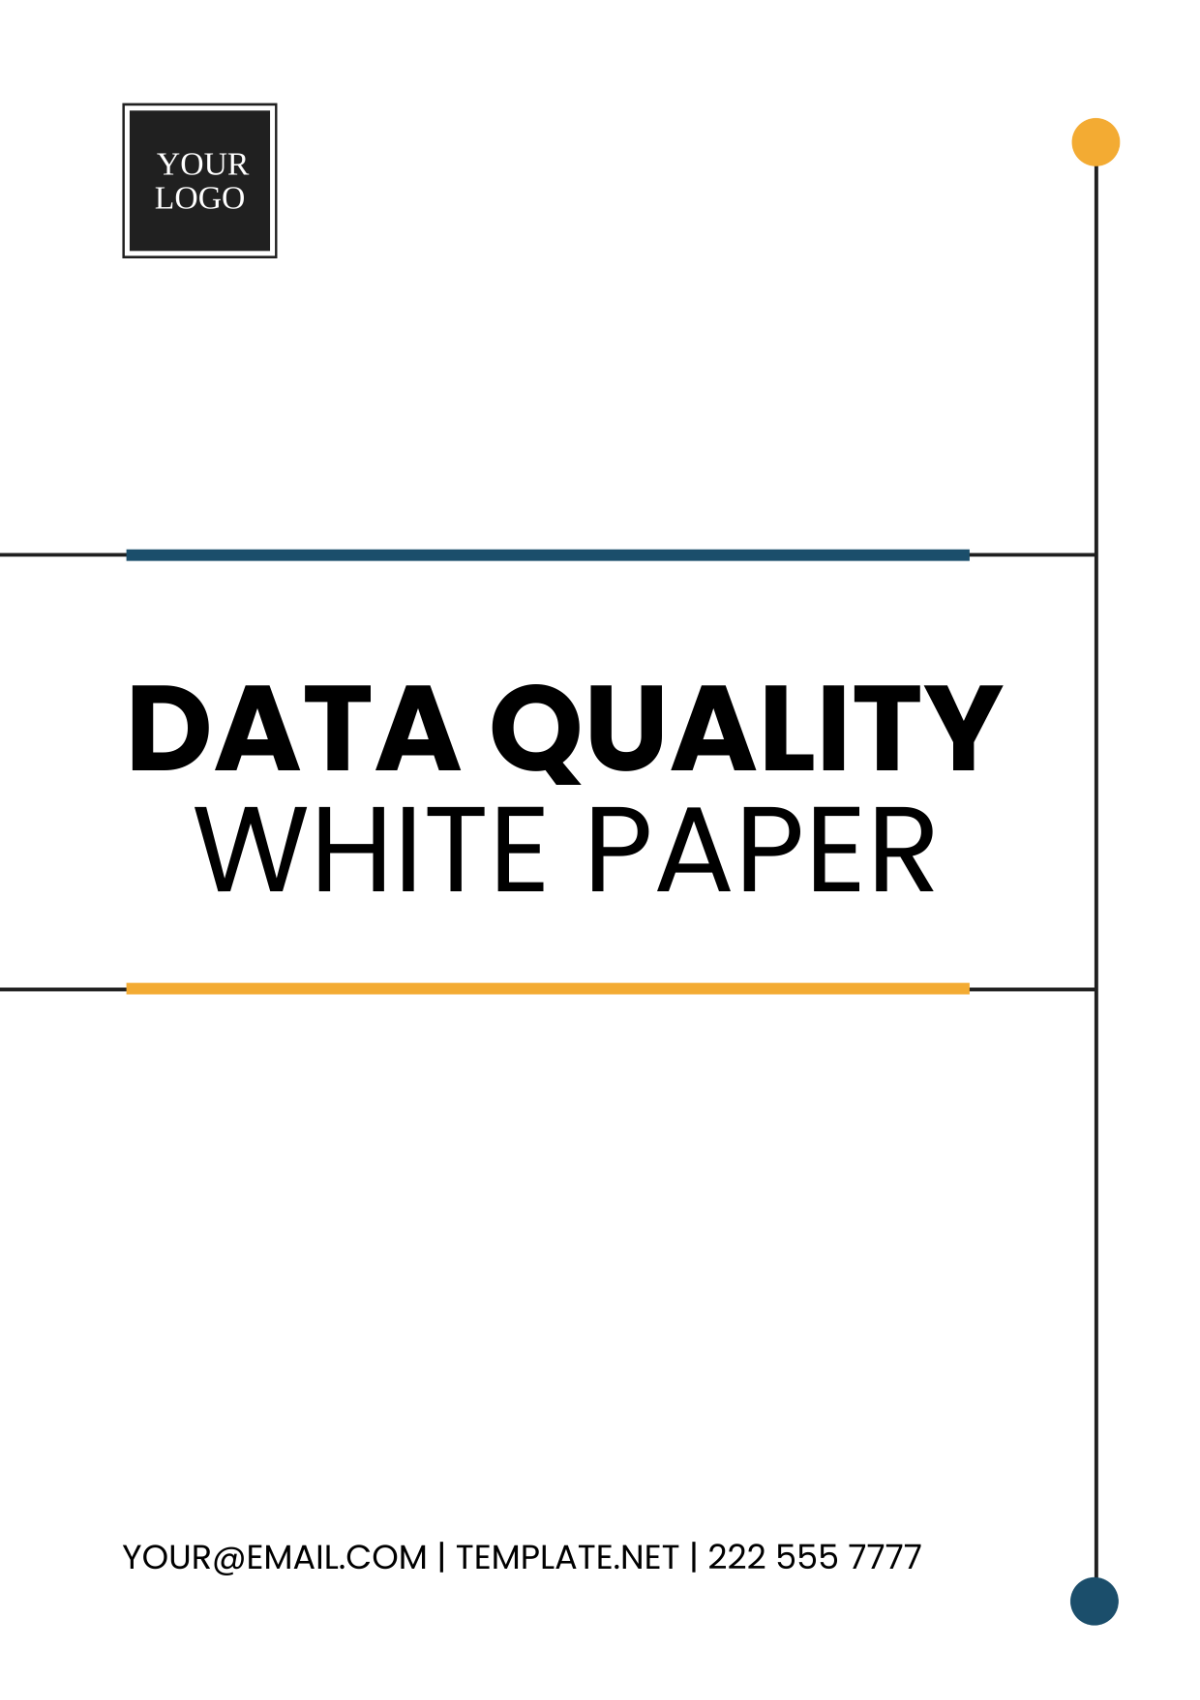 Data Quality White Paper Template